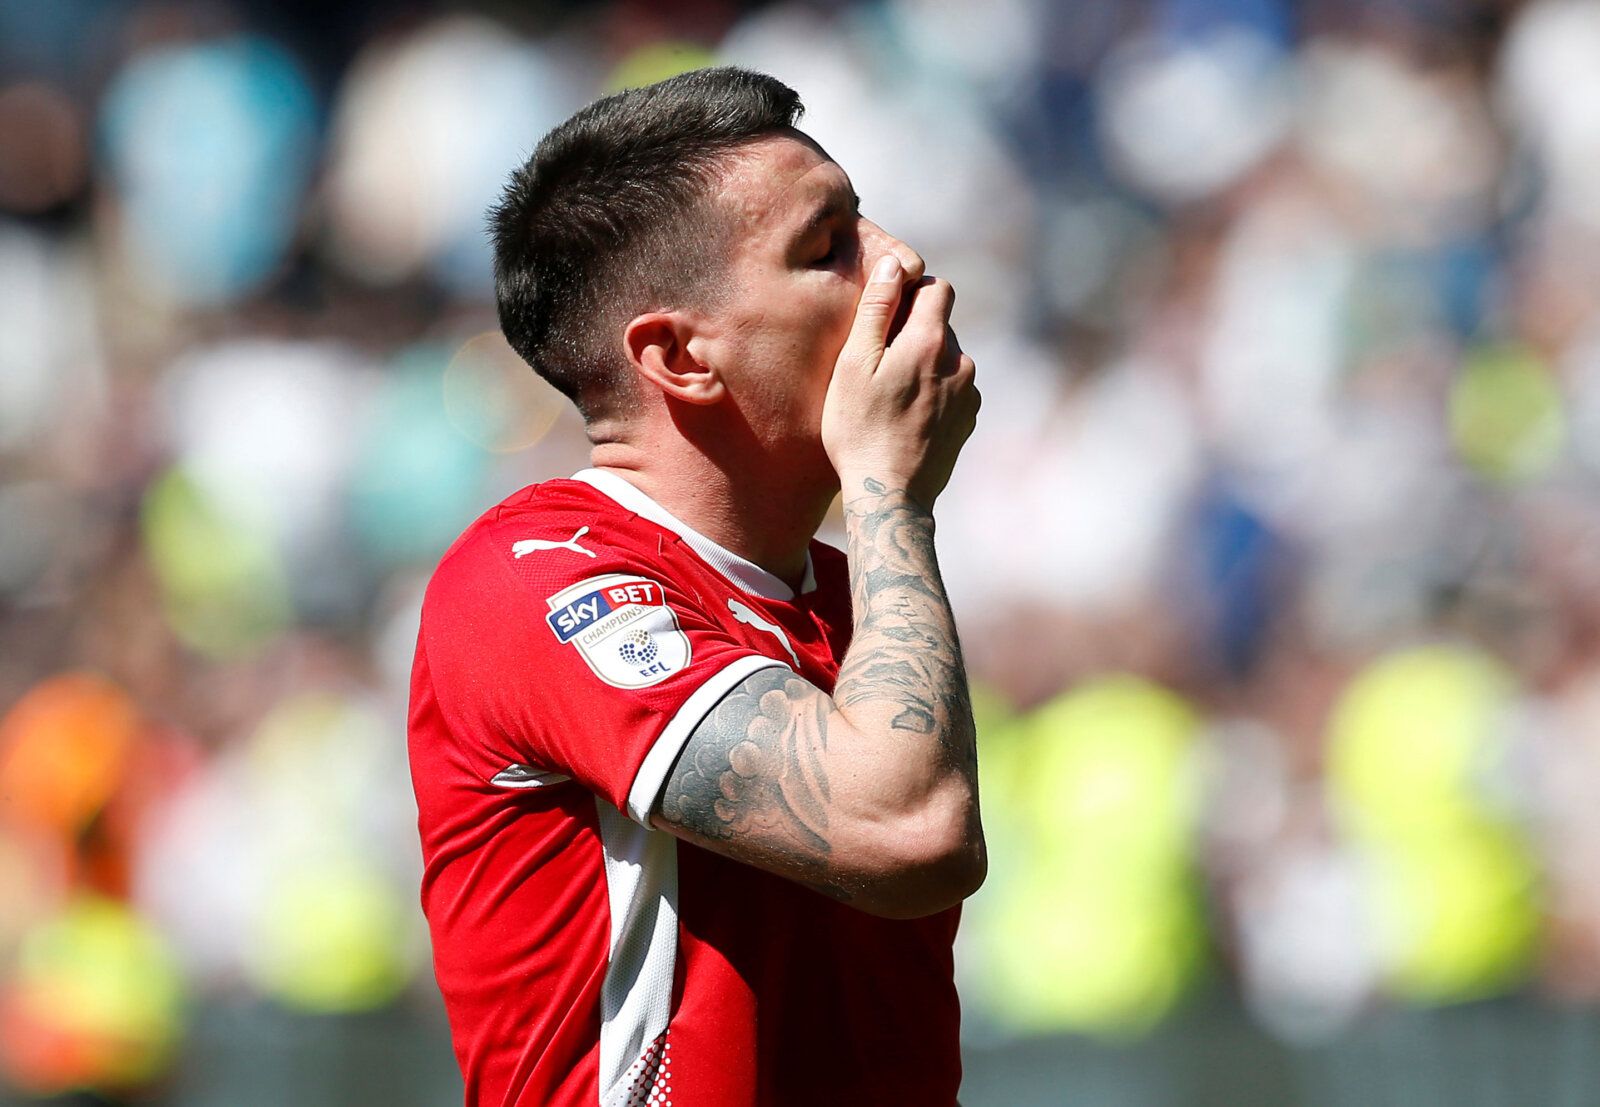 Soccer Football - Championship - Derby County vs Barnsley - Pride Park, Derby, Britain - May 6, 2018   Barnsley's Adam Hammill looks dejected after the match   Action Images/Craig Brough    EDITORIAL USE ONLY. No use with unauthorized audio, video, data, fixture lists, club/league logos or 